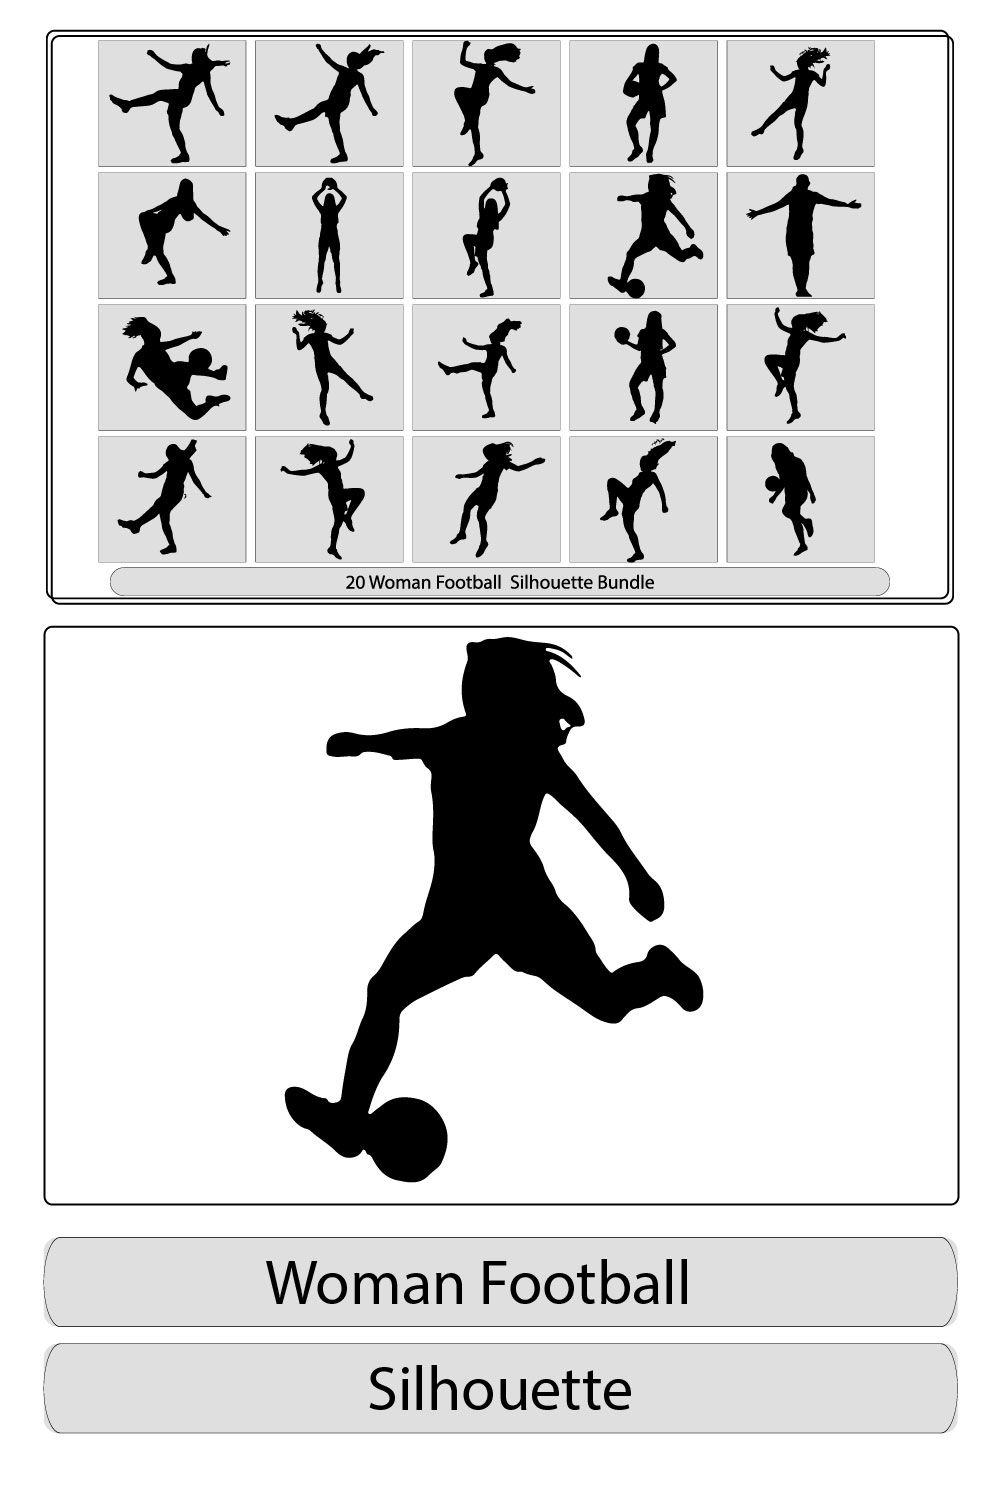 Woman's Soccer, Front View Sport Silhouette,Silhouette of a woman soccer player kicking ball pinterest preview image.